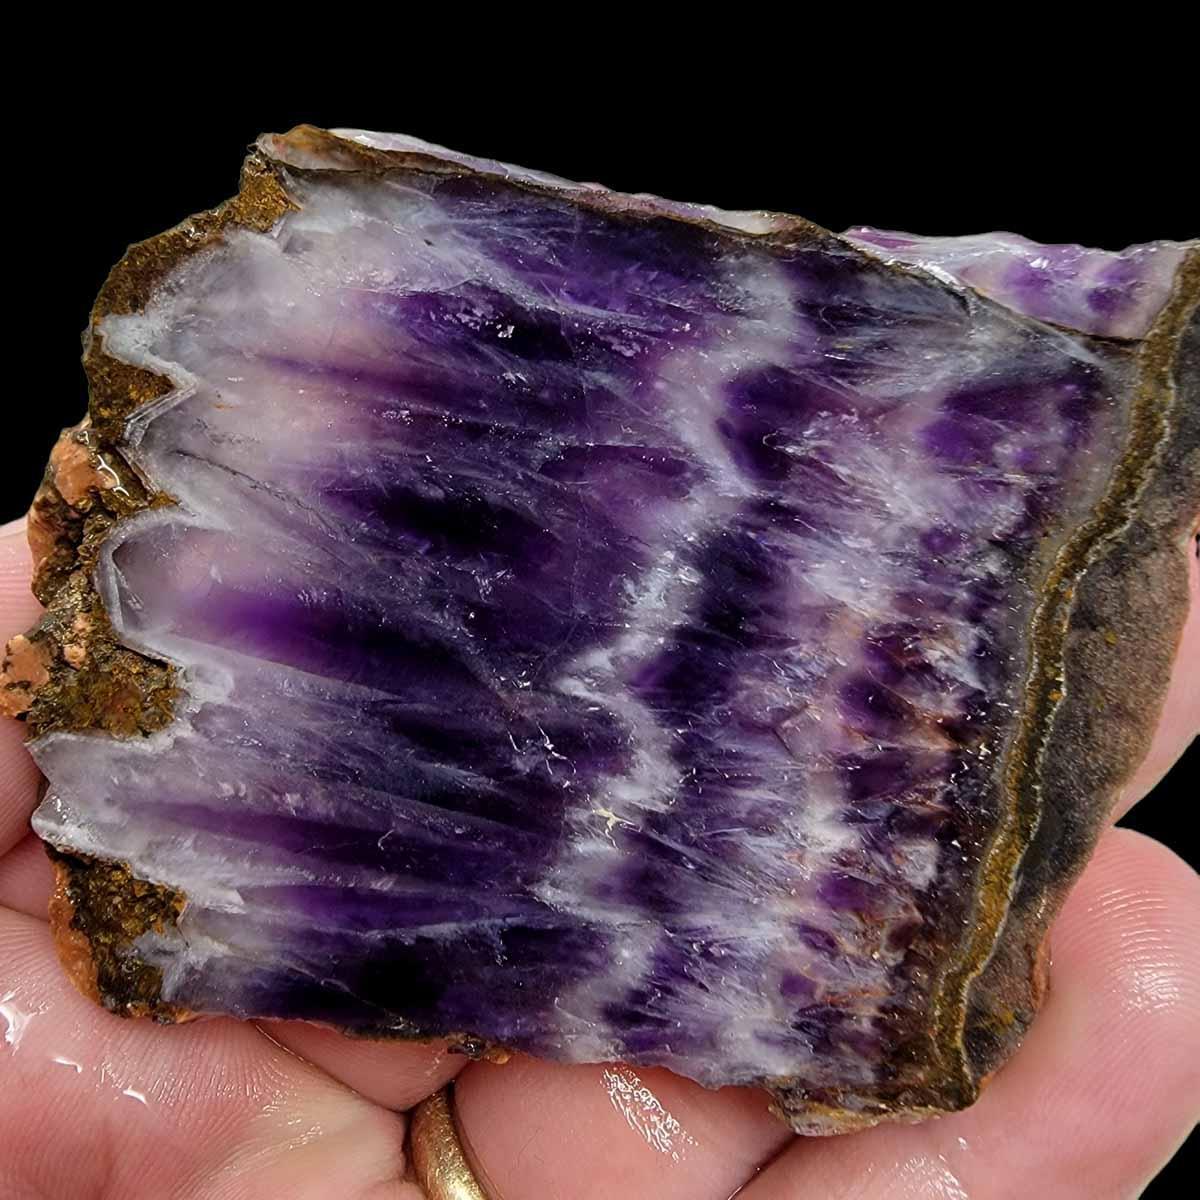 Moroccan Amethyst Lace Agate Slab!  Lapidary Stone Slab! - LapidaryCentral